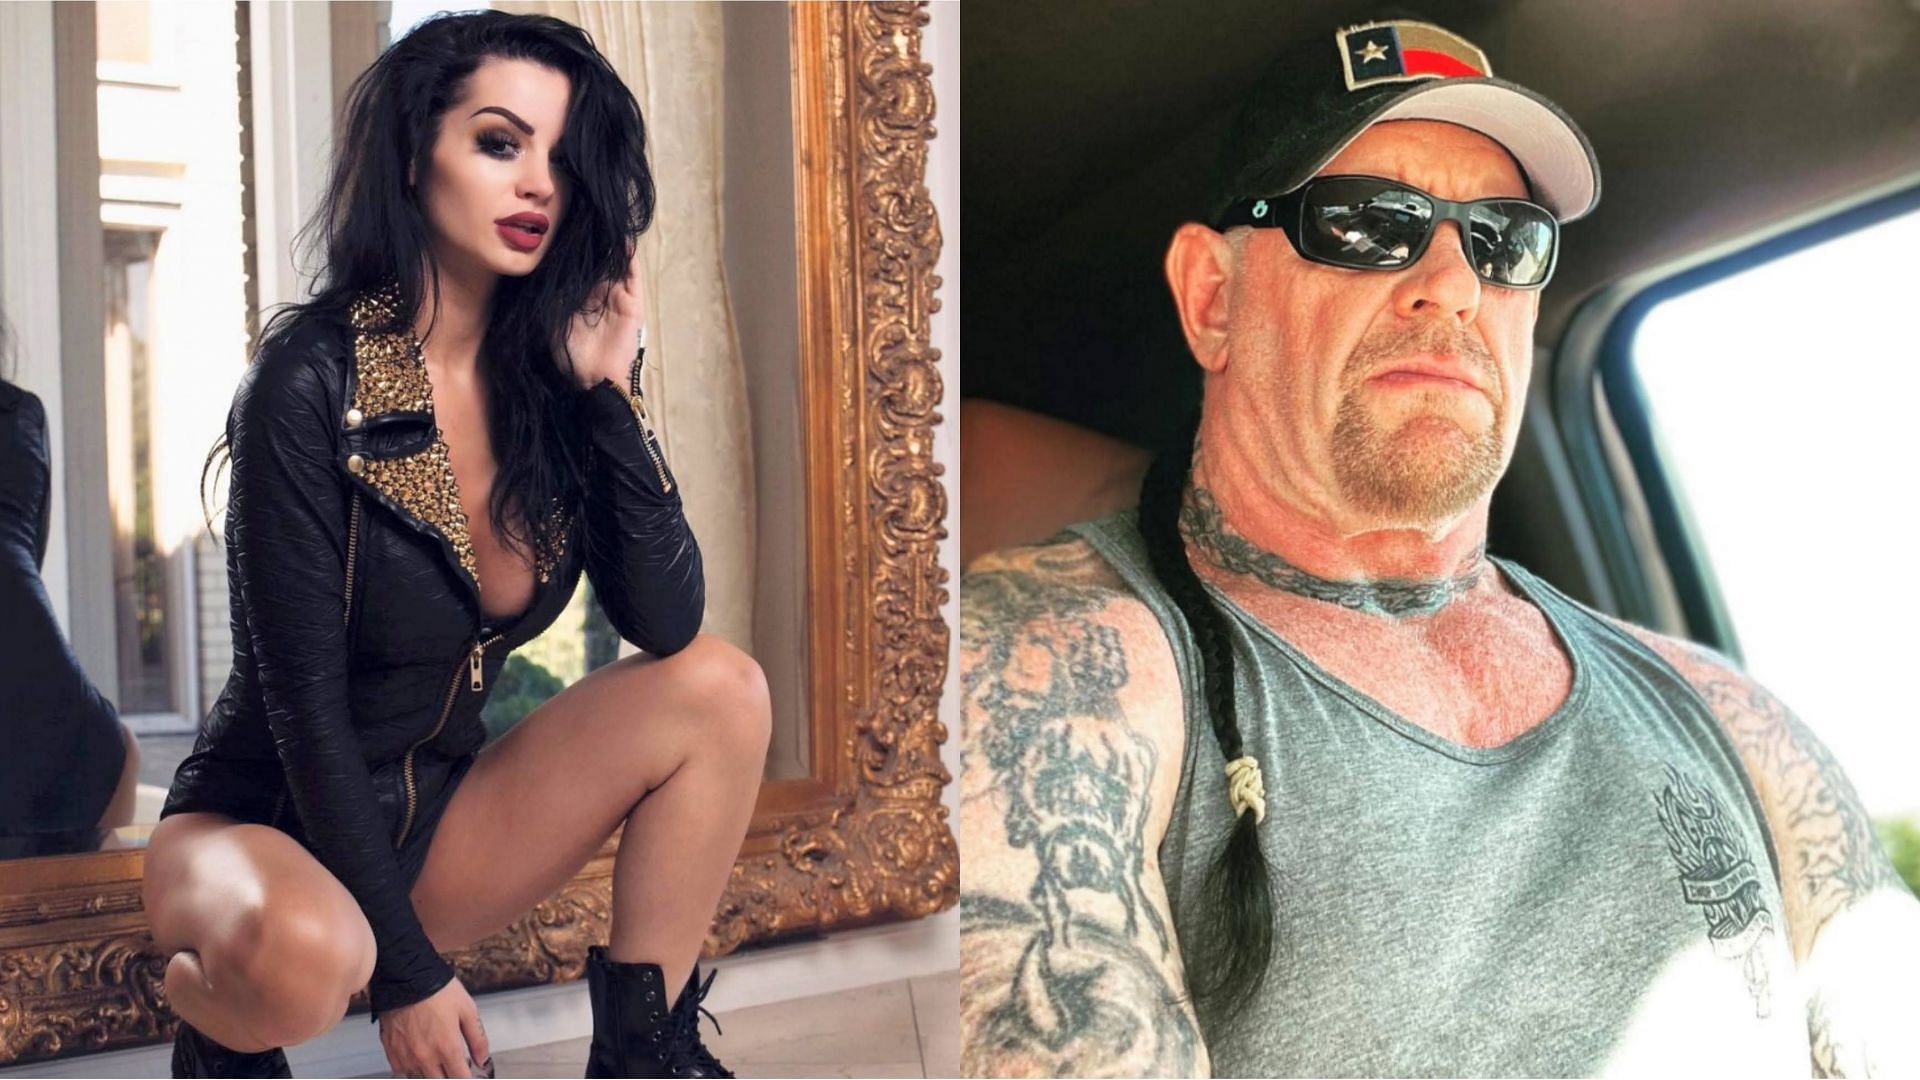 Paige (left) and The Undertaker (right)